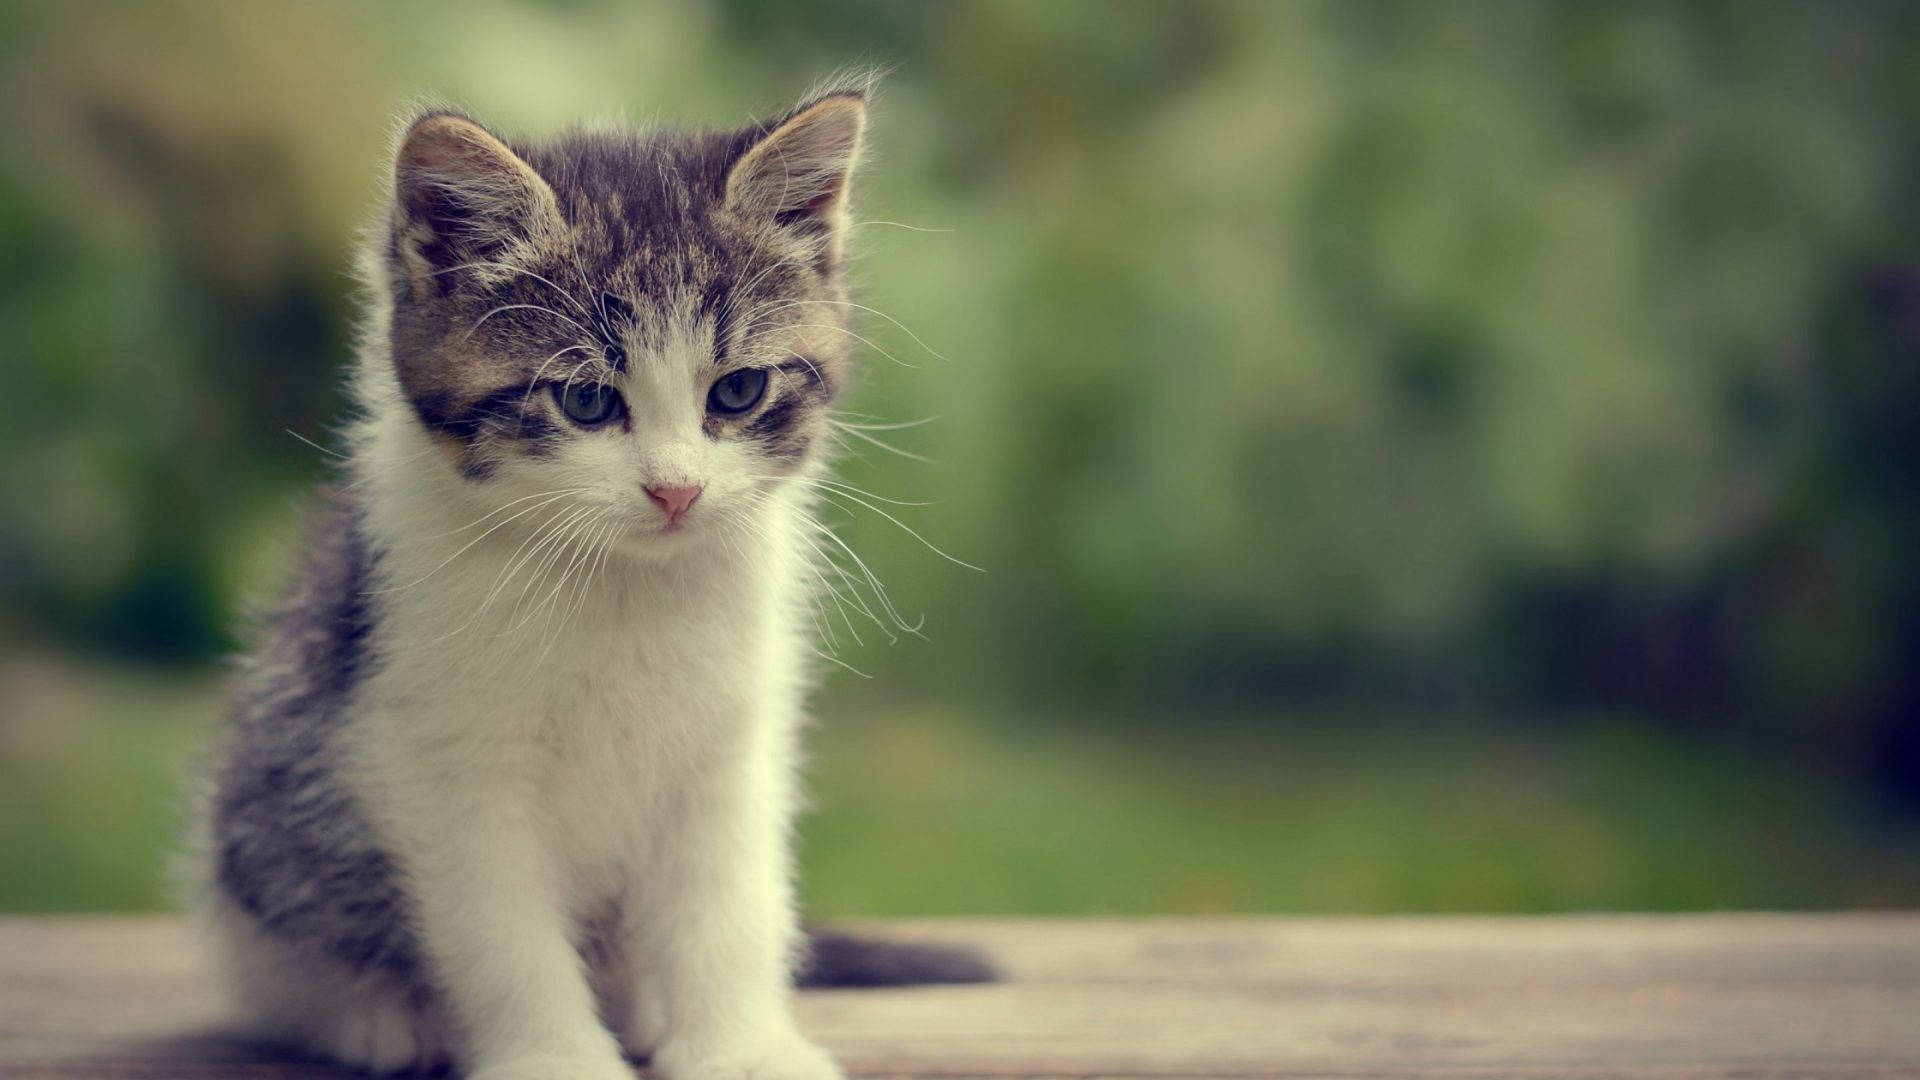 1920x1080 Download Kitten With Sad Face Wallpaper